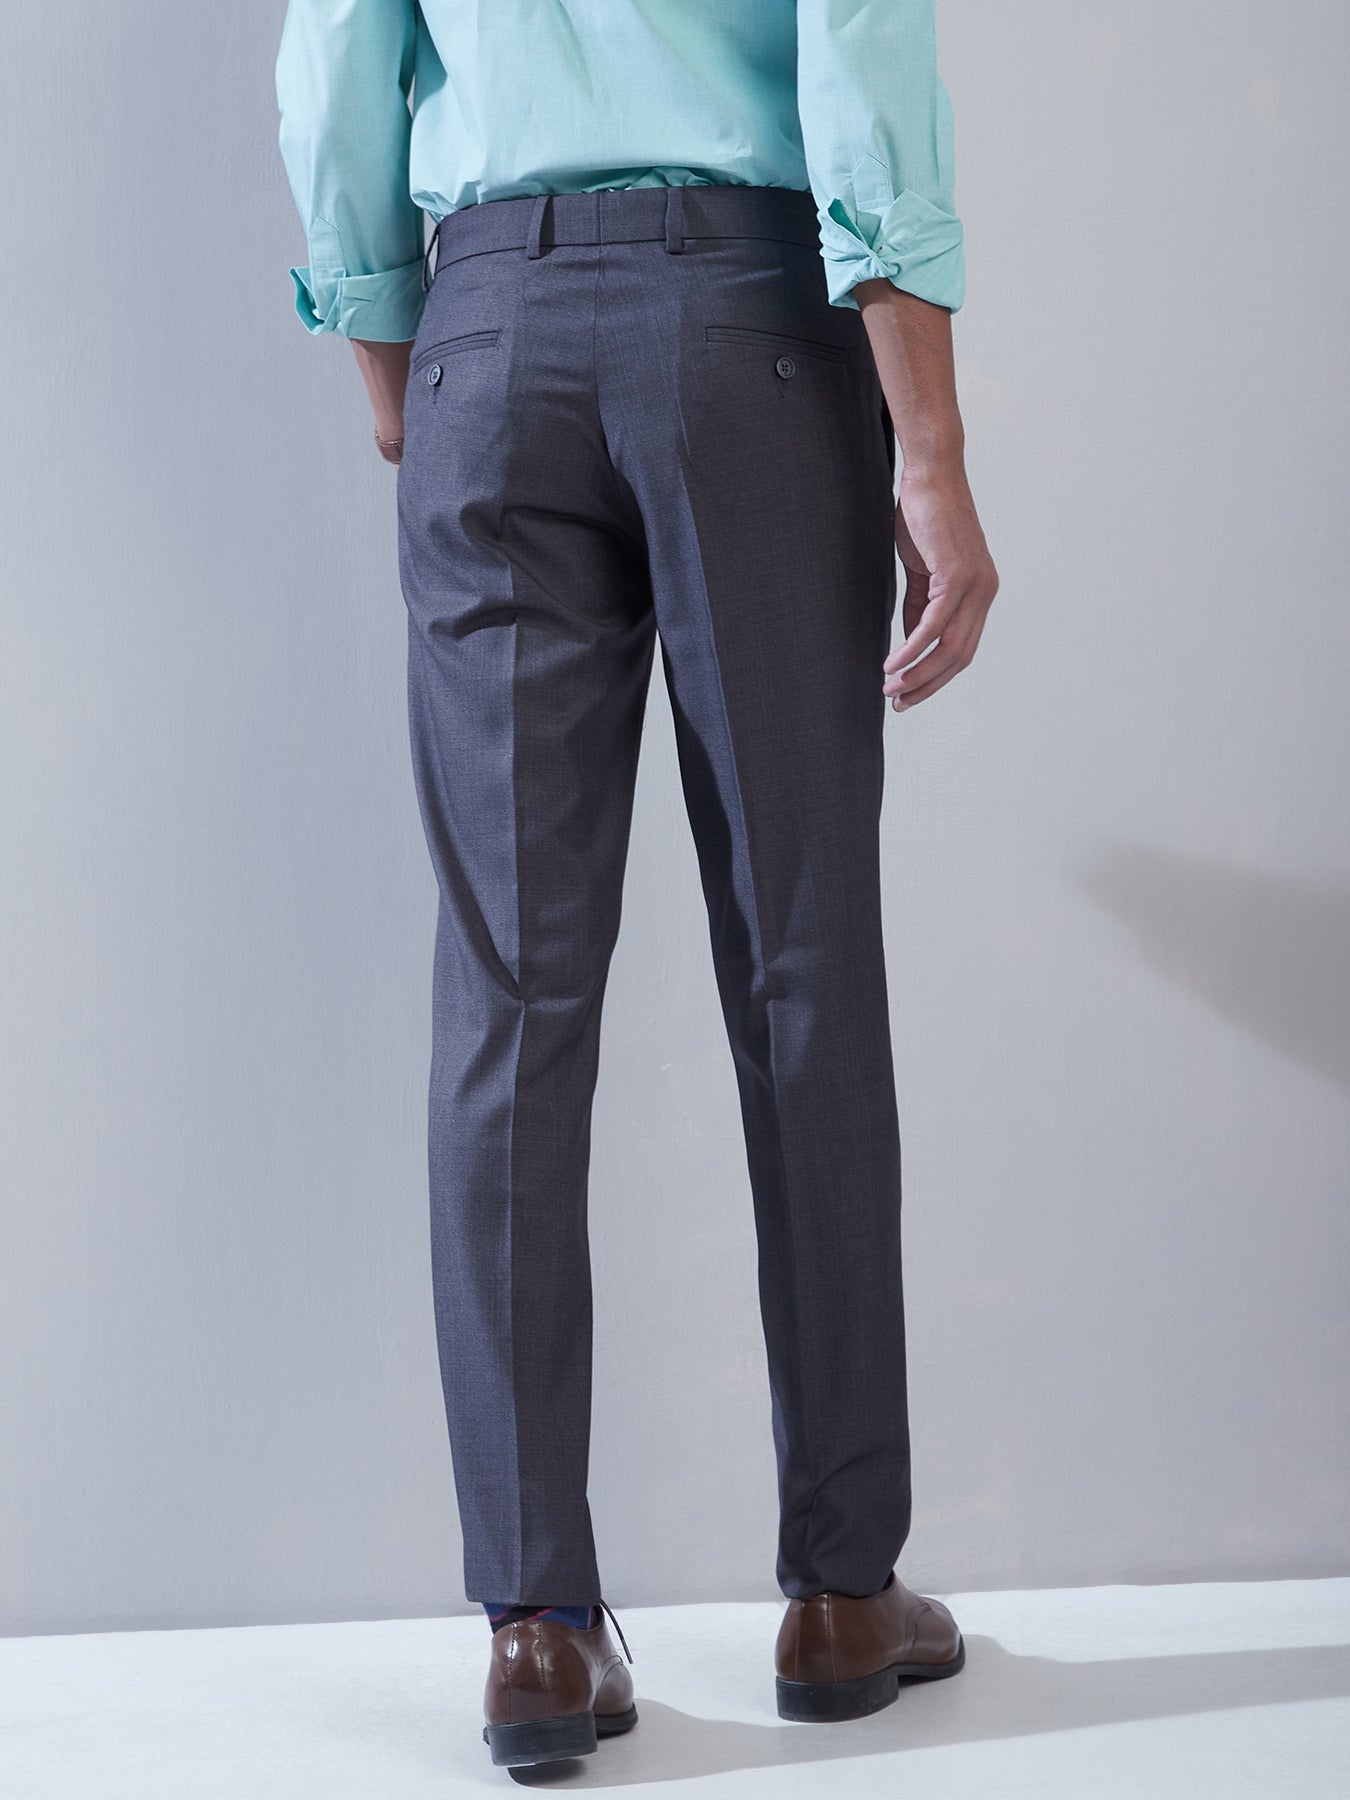 Terry Rayon Charcoal Grey Plain Slim Fit Flat Front Formal Trouser